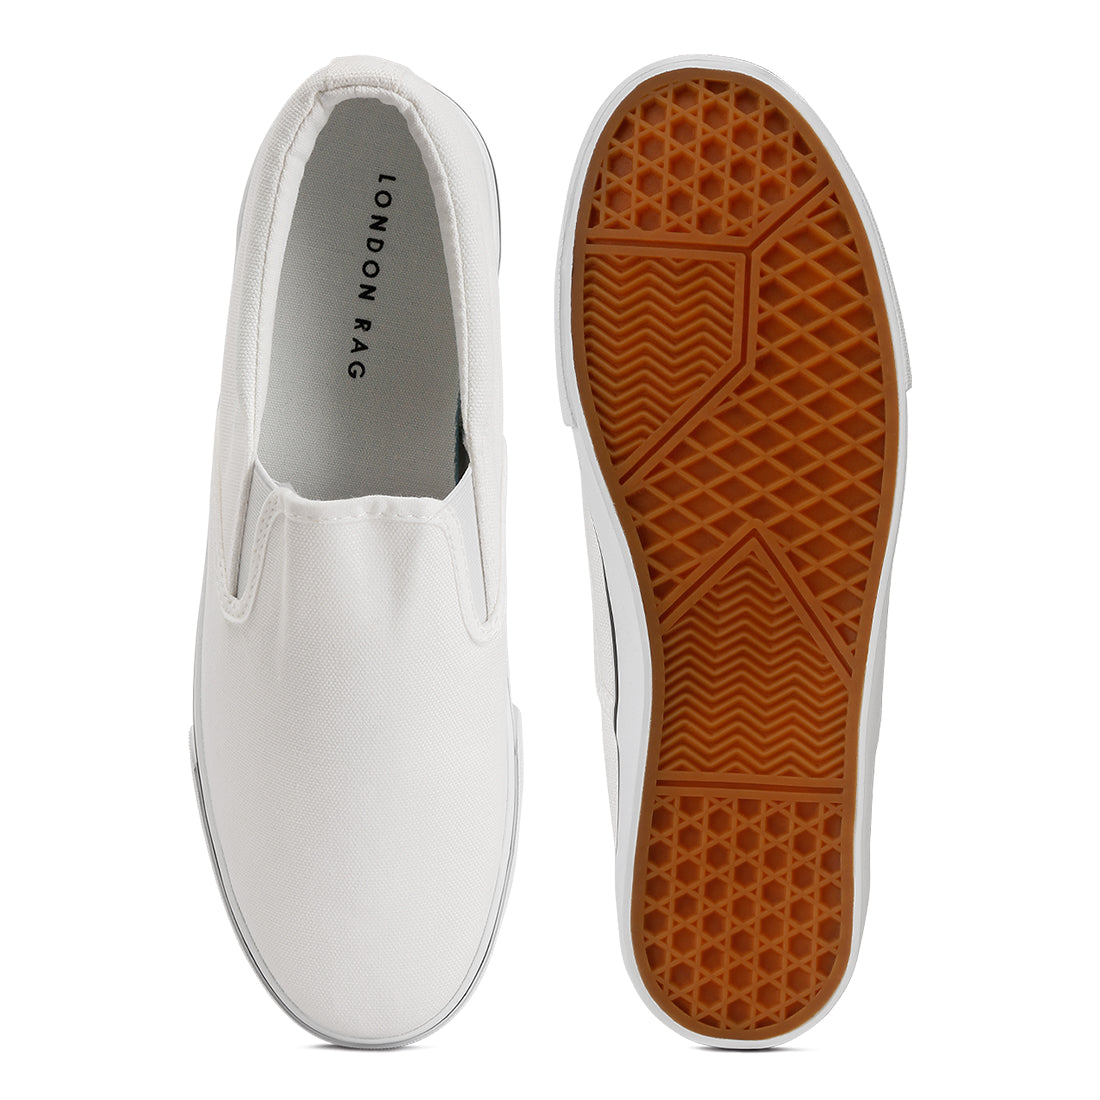 merlin canvas slip on sneakers#color_white